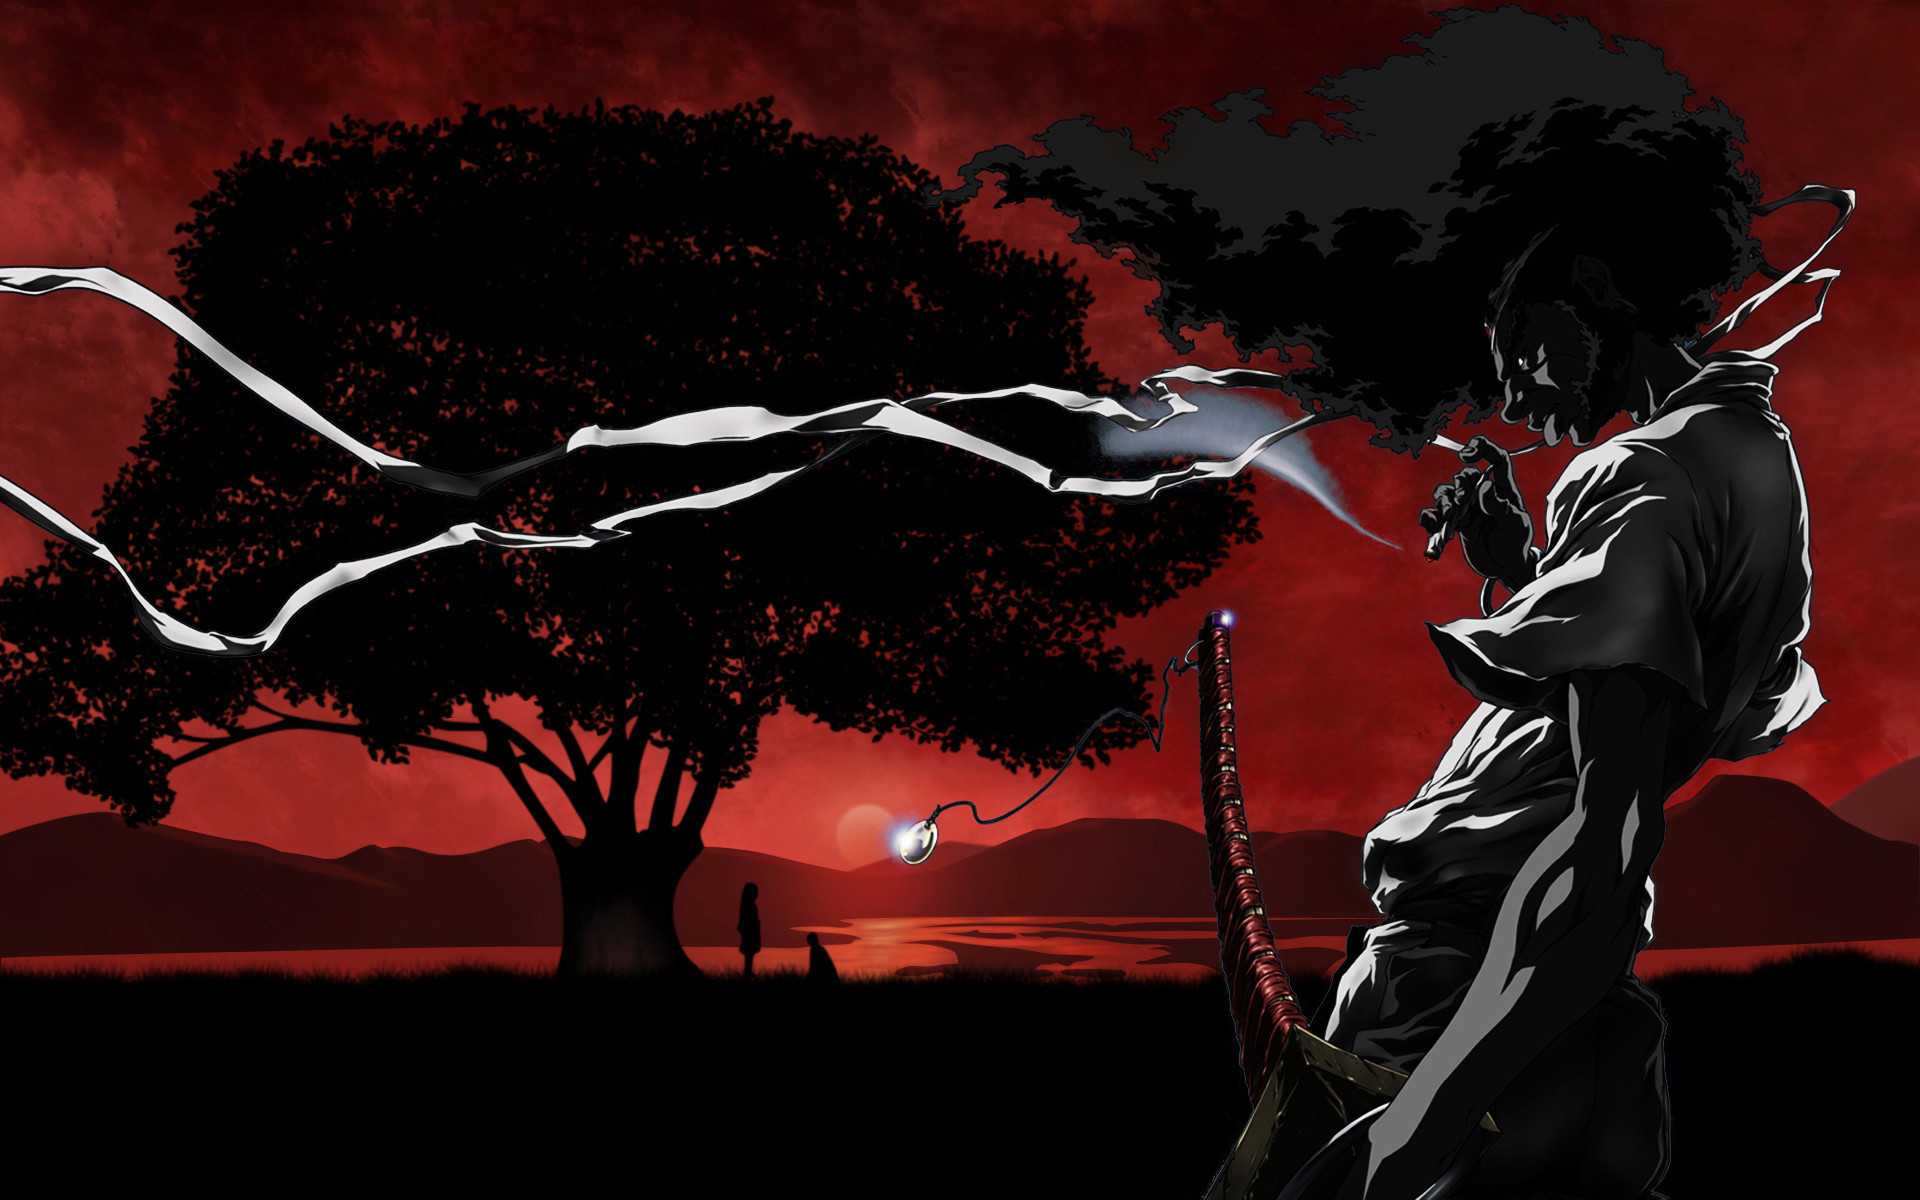 afro, Samurai, Anime, Game Wallpapers HD / Desktop and Mobile Backgrounds